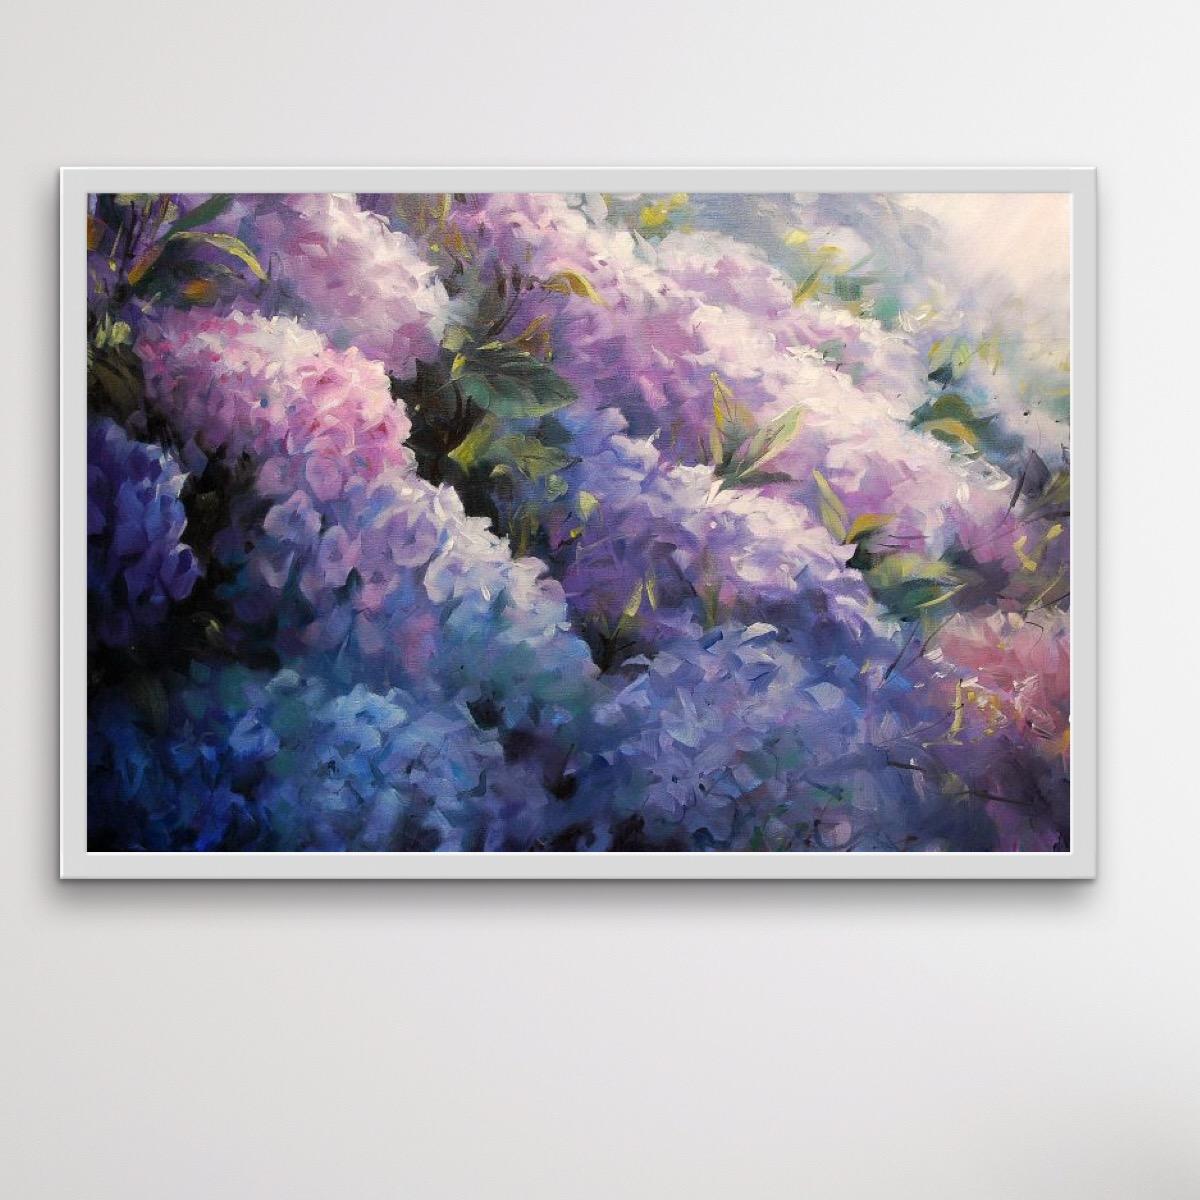 Hydrangeas In Sunlight
Trevor Waugh
Oil on stretched canvas
Unframed
Flowers
Please note that in situ images are purely an indication of how a piece may look.

Trevor Waugh's paintings are available online and at Wychwood Art. 
Trevor Waugh was born